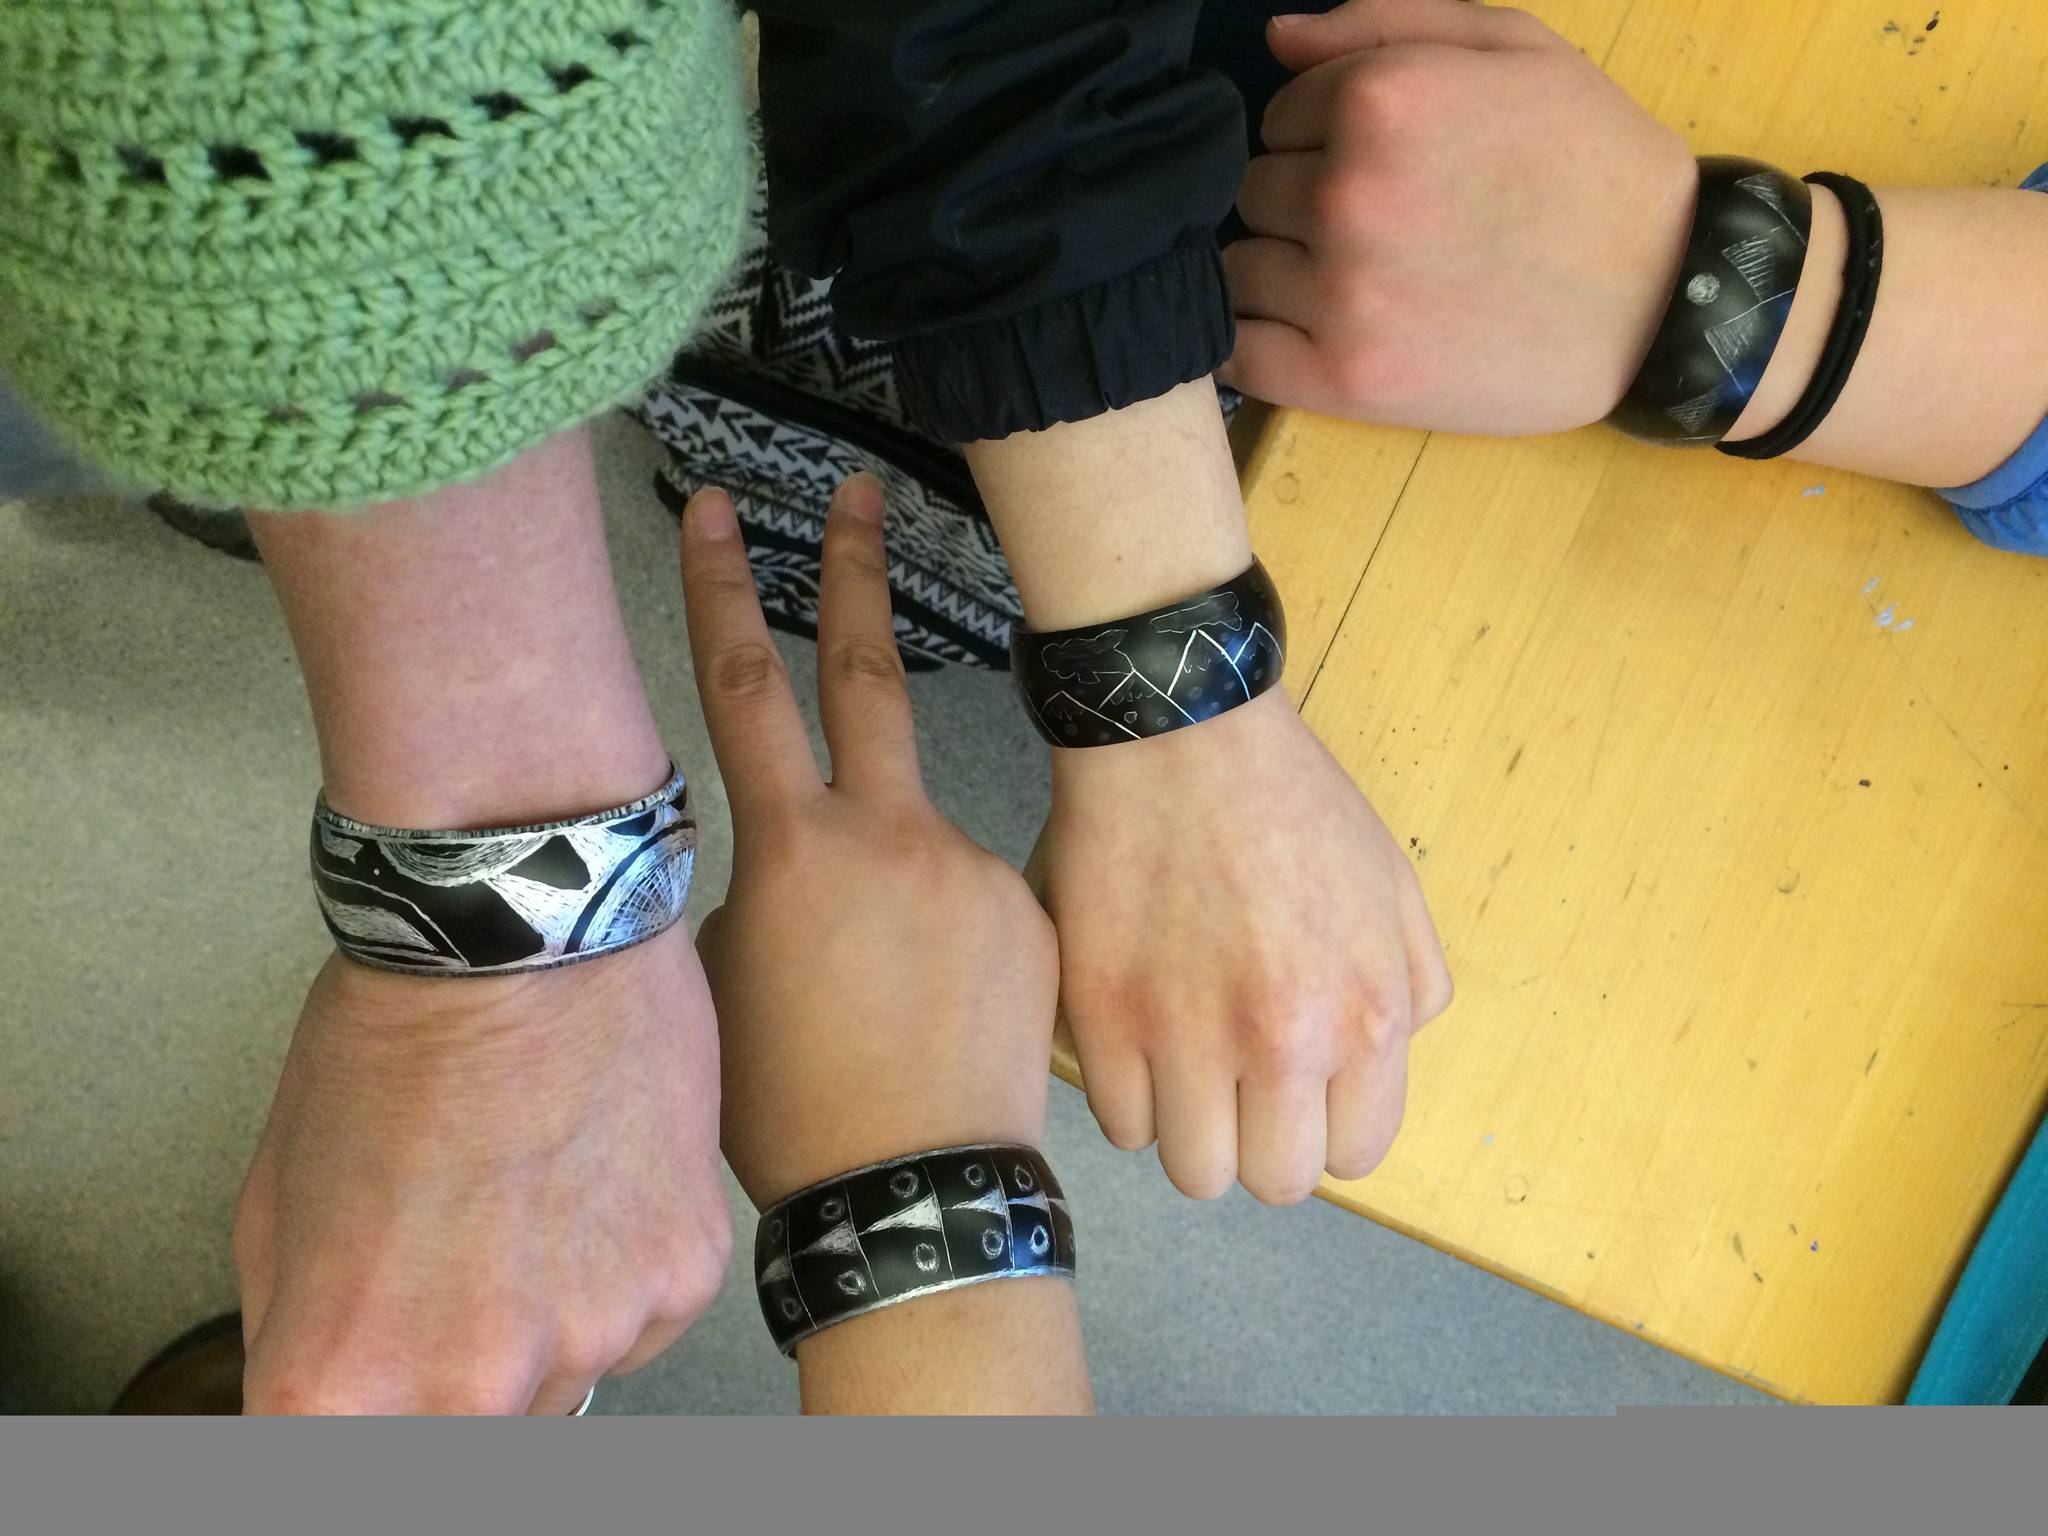 Students show off bracelets made during art class. Photo by Tane Skultka.